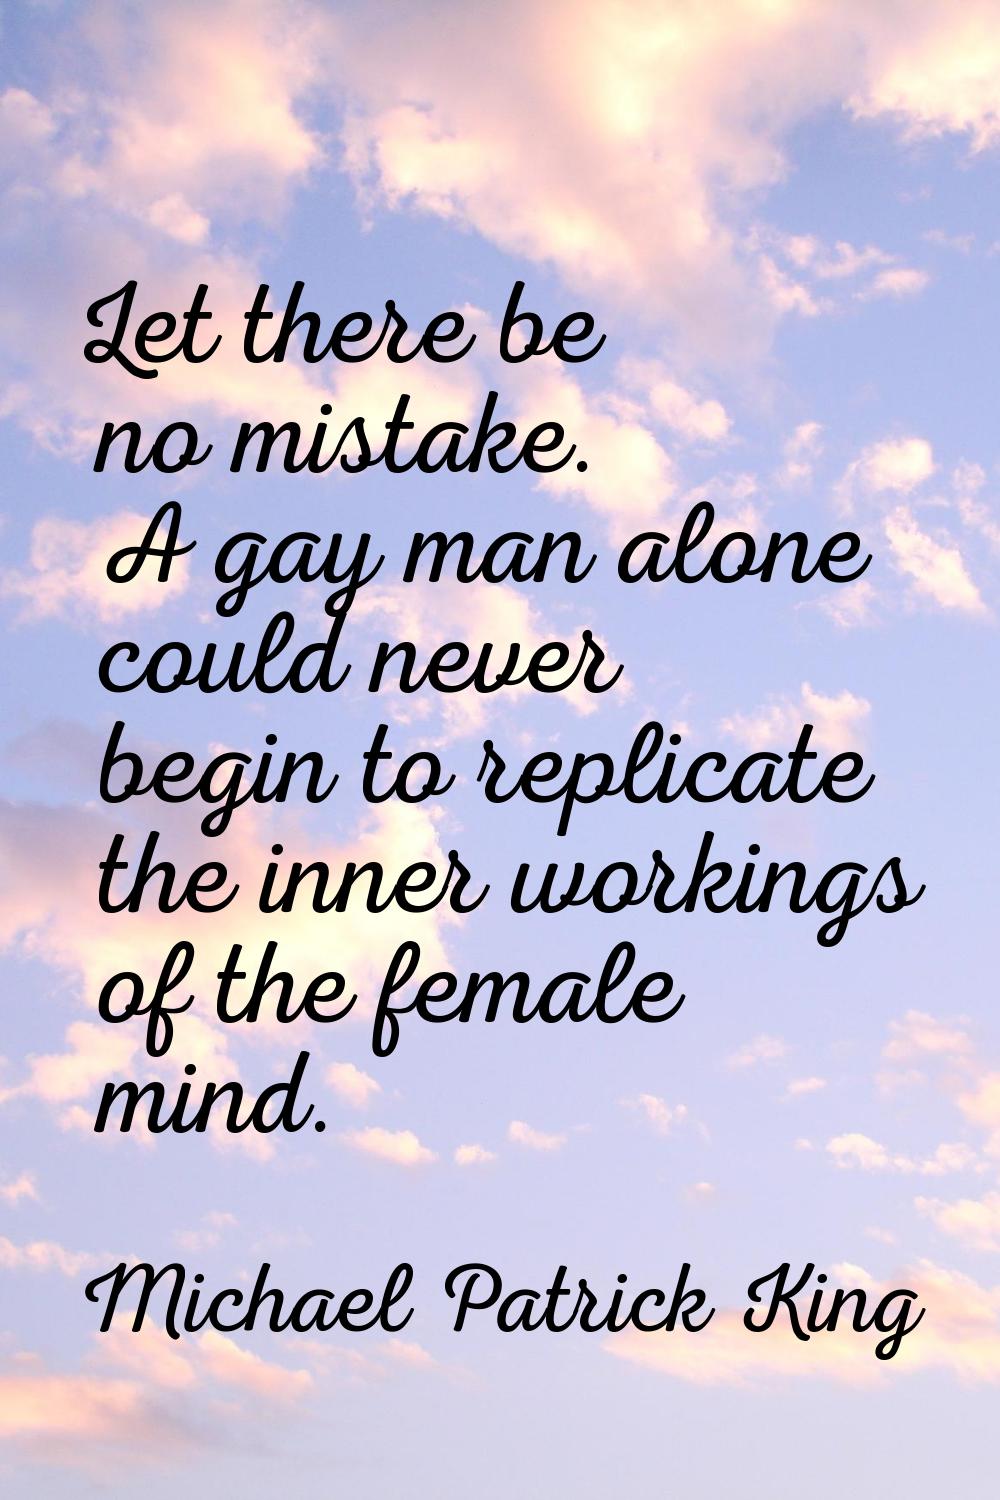 Let there be no mistake. A gay man alone could never begin to replicate the inner workings of the f